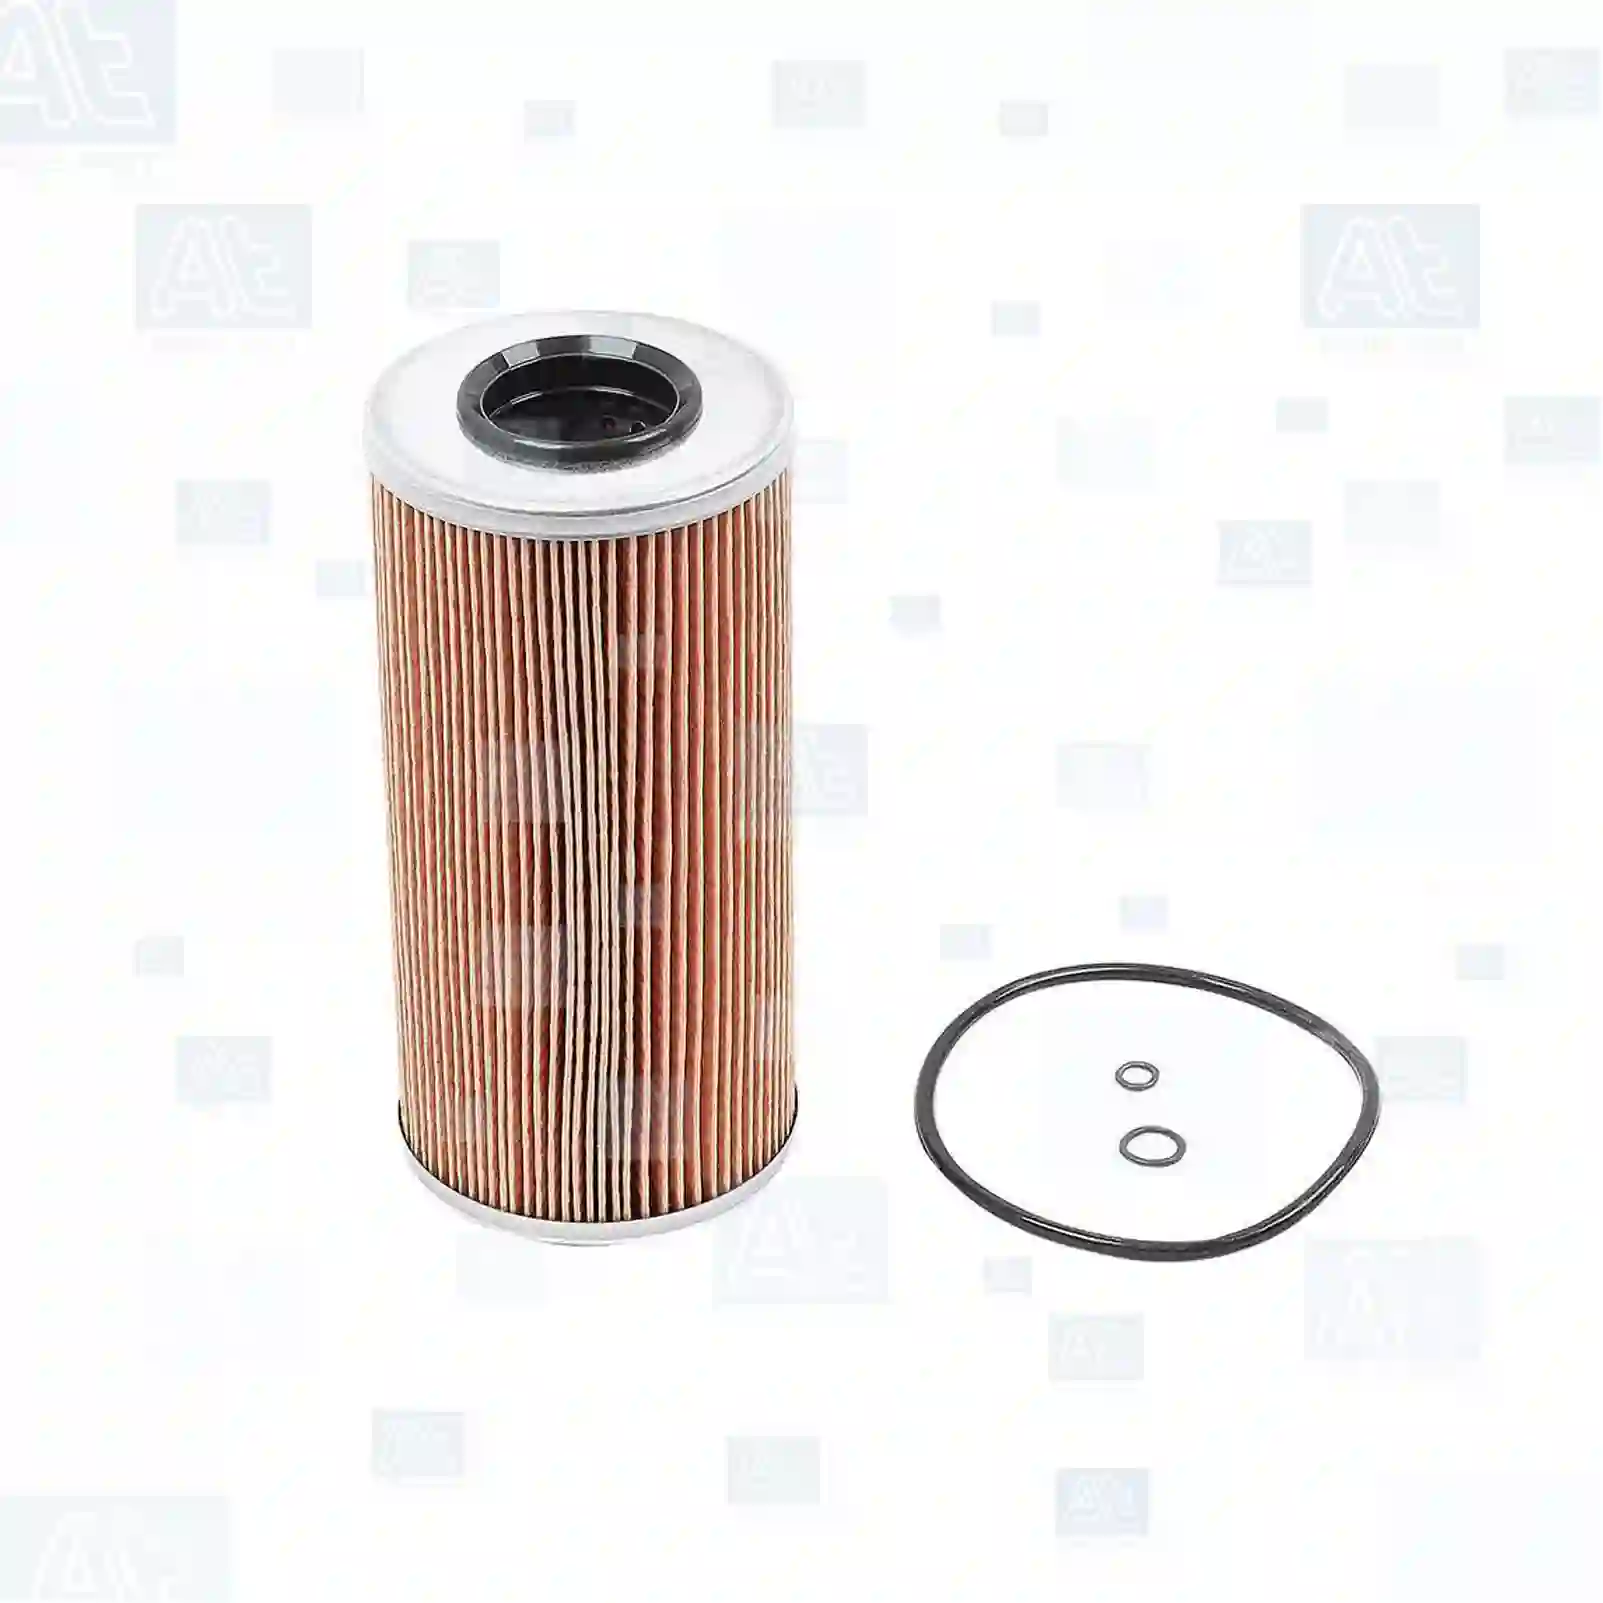 Oil filter insert, 77702106, 6021800009, 6061800009, 6061840025, 6061840125, 6061840225, F926202510010, 51055006073, 51055040105, 6021800009, 6021840025, 6061800009, 606180000967, 6061800109, 6061800910, 6061840025, 6061840125, 6061840225, 6281800009, 6281800109, 6281840025, 6005019830, 6061800009ME, 6611803209, 6611803309, 6611803409, 6611843325, 6061800009, 07W115436A, ZG01736-0008 ||  77702106 At Spare Part | Engine, Accelerator Pedal, Camshaft, Connecting Rod, Crankcase, Crankshaft, Cylinder Head, Engine Suspension Mountings, Exhaust Manifold, Exhaust Gas Recirculation, Filter Kits, Flywheel Housing, General Overhaul Kits, Engine, Intake Manifold, Oil Cleaner, Oil Cooler, Oil Filter, Oil Pump, Oil Sump, Piston & Liner, Sensor & Switch, Timing Case, Turbocharger, Cooling System, Belt Tensioner, Coolant Filter, Coolant Pipe, Corrosion Prevention Agent, Drive, Expansion Tank, Fan, Intercooler, Monitors & Gauges, Radiator, Thermostat, V-Belt / Timing belt, Water Pump, Fuel System, Electronical Injector Unit, Feed Pump, Fuel Filter, cpl., Fuel Gauge Sender,  Fuel Line, Fuel Pump, Fuel Tank, Injection Line Kit, Injection Pump, Exhaust System, Clutch & Pedal, Gearbox, Propeller Shaft, Axles, Brake System, Hubs & Wheels, Suspension, Leaf Spring, Universal Parts / Accessories, Steering, Electrical System, Cabin Oil filter insert, 77702106, 6021800009, 6061800009, 6061840025, 6061840125, 6061840225, F926202510010, 51055006073, 51055040105, 6021800009, 6021840025, 6061800009, 606180000967, 6061800109, 6061800910, 6061840025, 6061840125, 6061840225, 6281800009, 6281800109, 6281840025, 6005019830, 6061800009ME, 6611803209, 6611803309, 6611803409, 6611843325, 6061800009, 07W115436A, ZG01736-0008 ||  77702106 At Spare Part | Engine, Accelerator Pedal, Camshaft, Connecting Rod, Crankcase, Crankshaft, Cylinder Head, Engine Suspension Mountings, Exhaust Manifold, Exhaust Gas Recirculation, Filter Kits, Flywheel Housing, General Overhaul Kits, Engine, Intake Manifold, Oil Cleaner, Oil Cooler, Oil Filter, Oil Pump, Oil Sump, Piston & Liner, Sensor & Switch, Timing Case, Turbocharger, Cooling System, Belt Tensioner, Coolant Filter, Coolant Pipe, Corrosion Prevention Agent, Drive, Expansion Tank, Fan, Intercooler, Monitors & Gauges, Radiator, Thermostat, V-Belt / Timing belt, Water Pump, Fuel System, Electronical Injector Unit, Feed Pump, Fuel Filter, cpl., Fuel Gauge Sender,  Fuel Line, Fuel Pump, Fuel Tank, Injection Line Kit, Injection Pump, Exhaust System, Clutch & Pedal, Gearbox, Propeller Shaft, Axles, Brake System, Hubs & Wheels, Suspension, Leaf Spring, Universal Parts / Accessories, Steering, Electrical System, Cabin